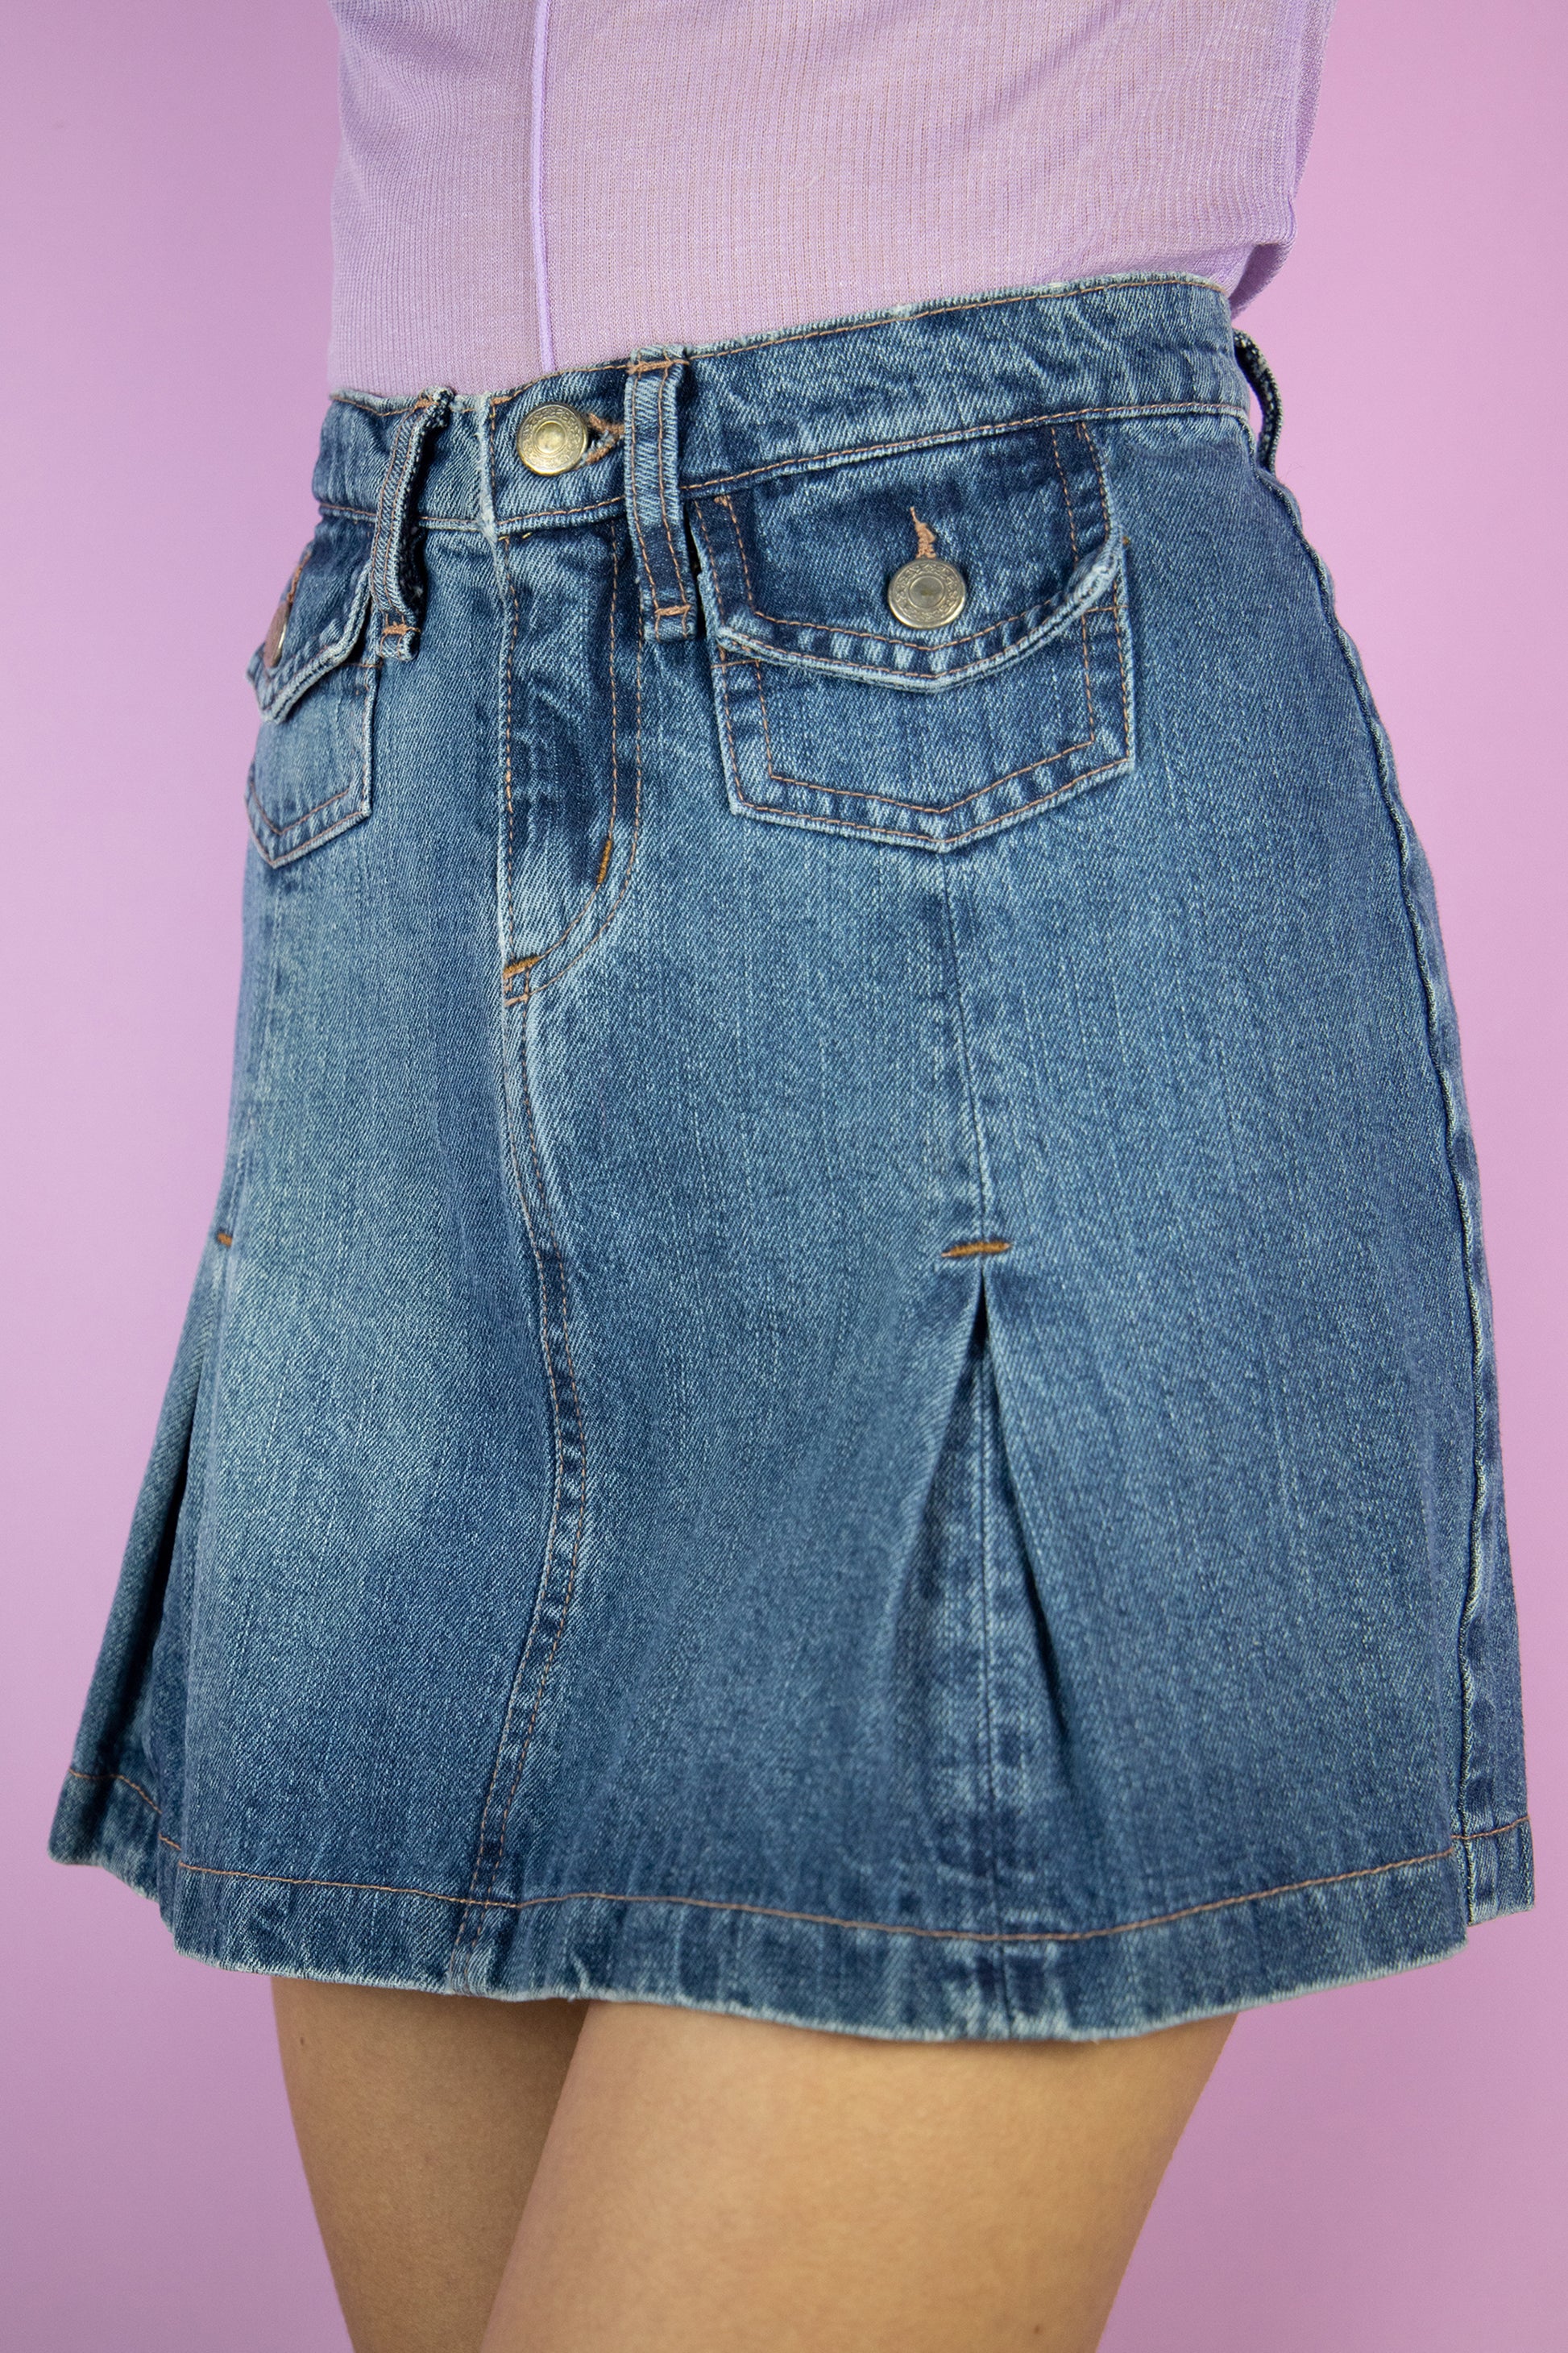 The Vintage 90s Denim Pleated Mini Skirt is a denim skirt with pleats and pockets. Super cute 2000s cyber mini skirt.